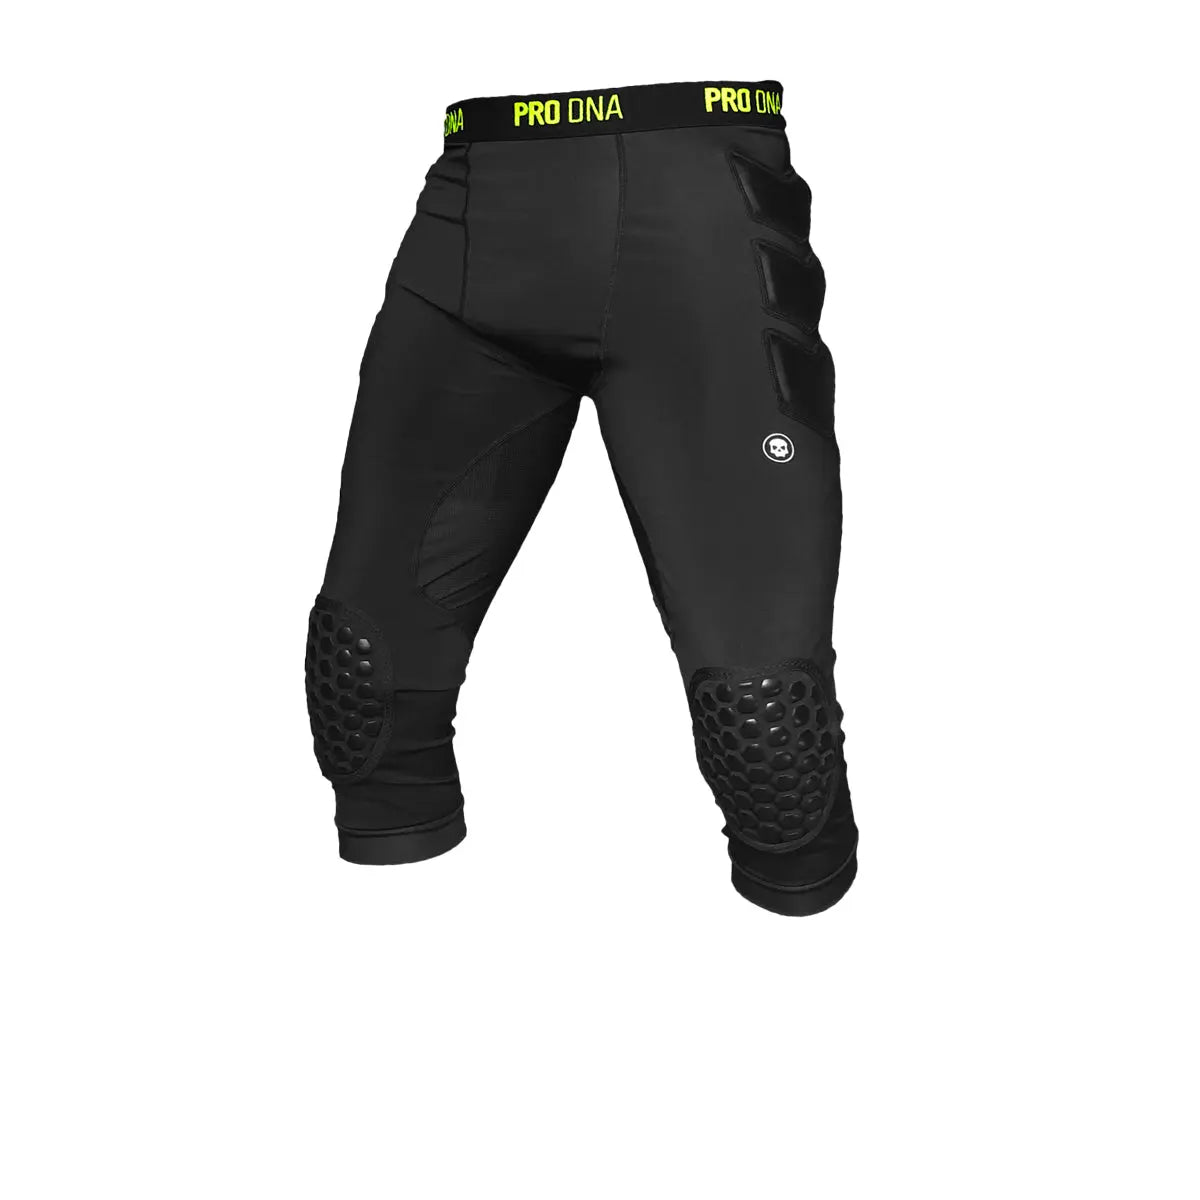 Infamous PRO DNA Slide Shorts With Knee Pads